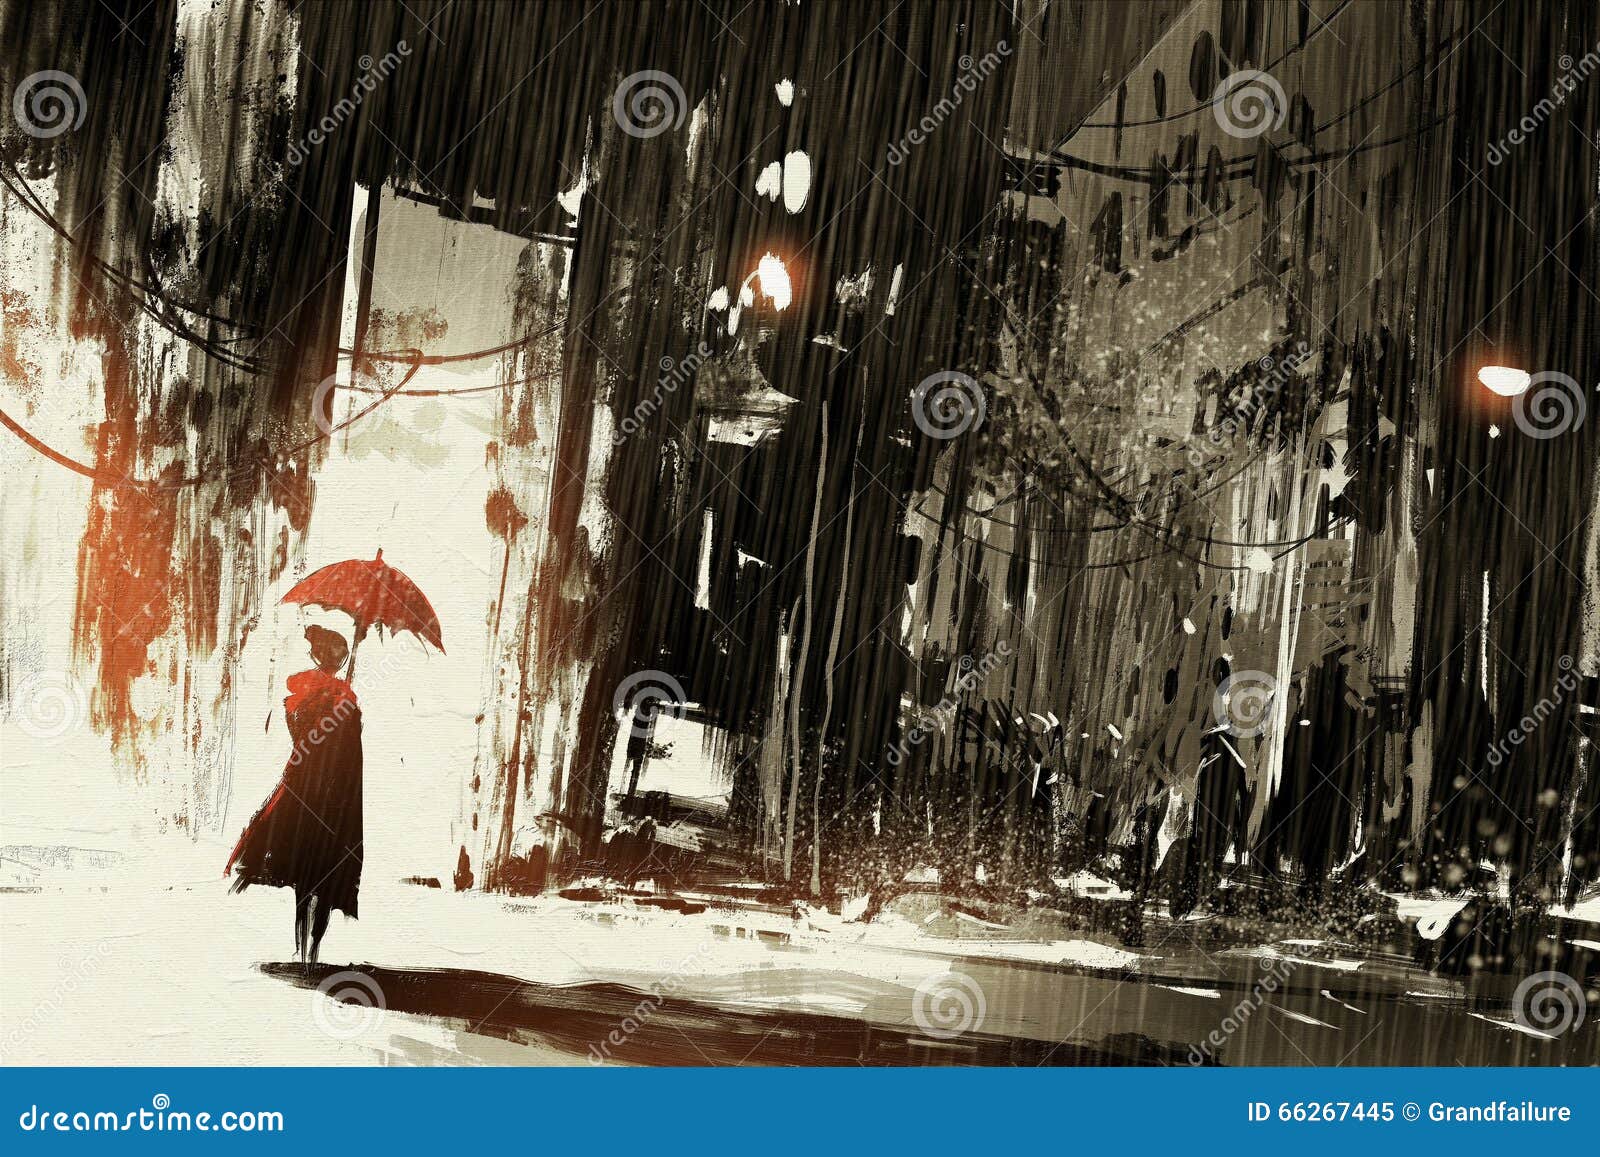 lonely woman with umbrella in abandoned city